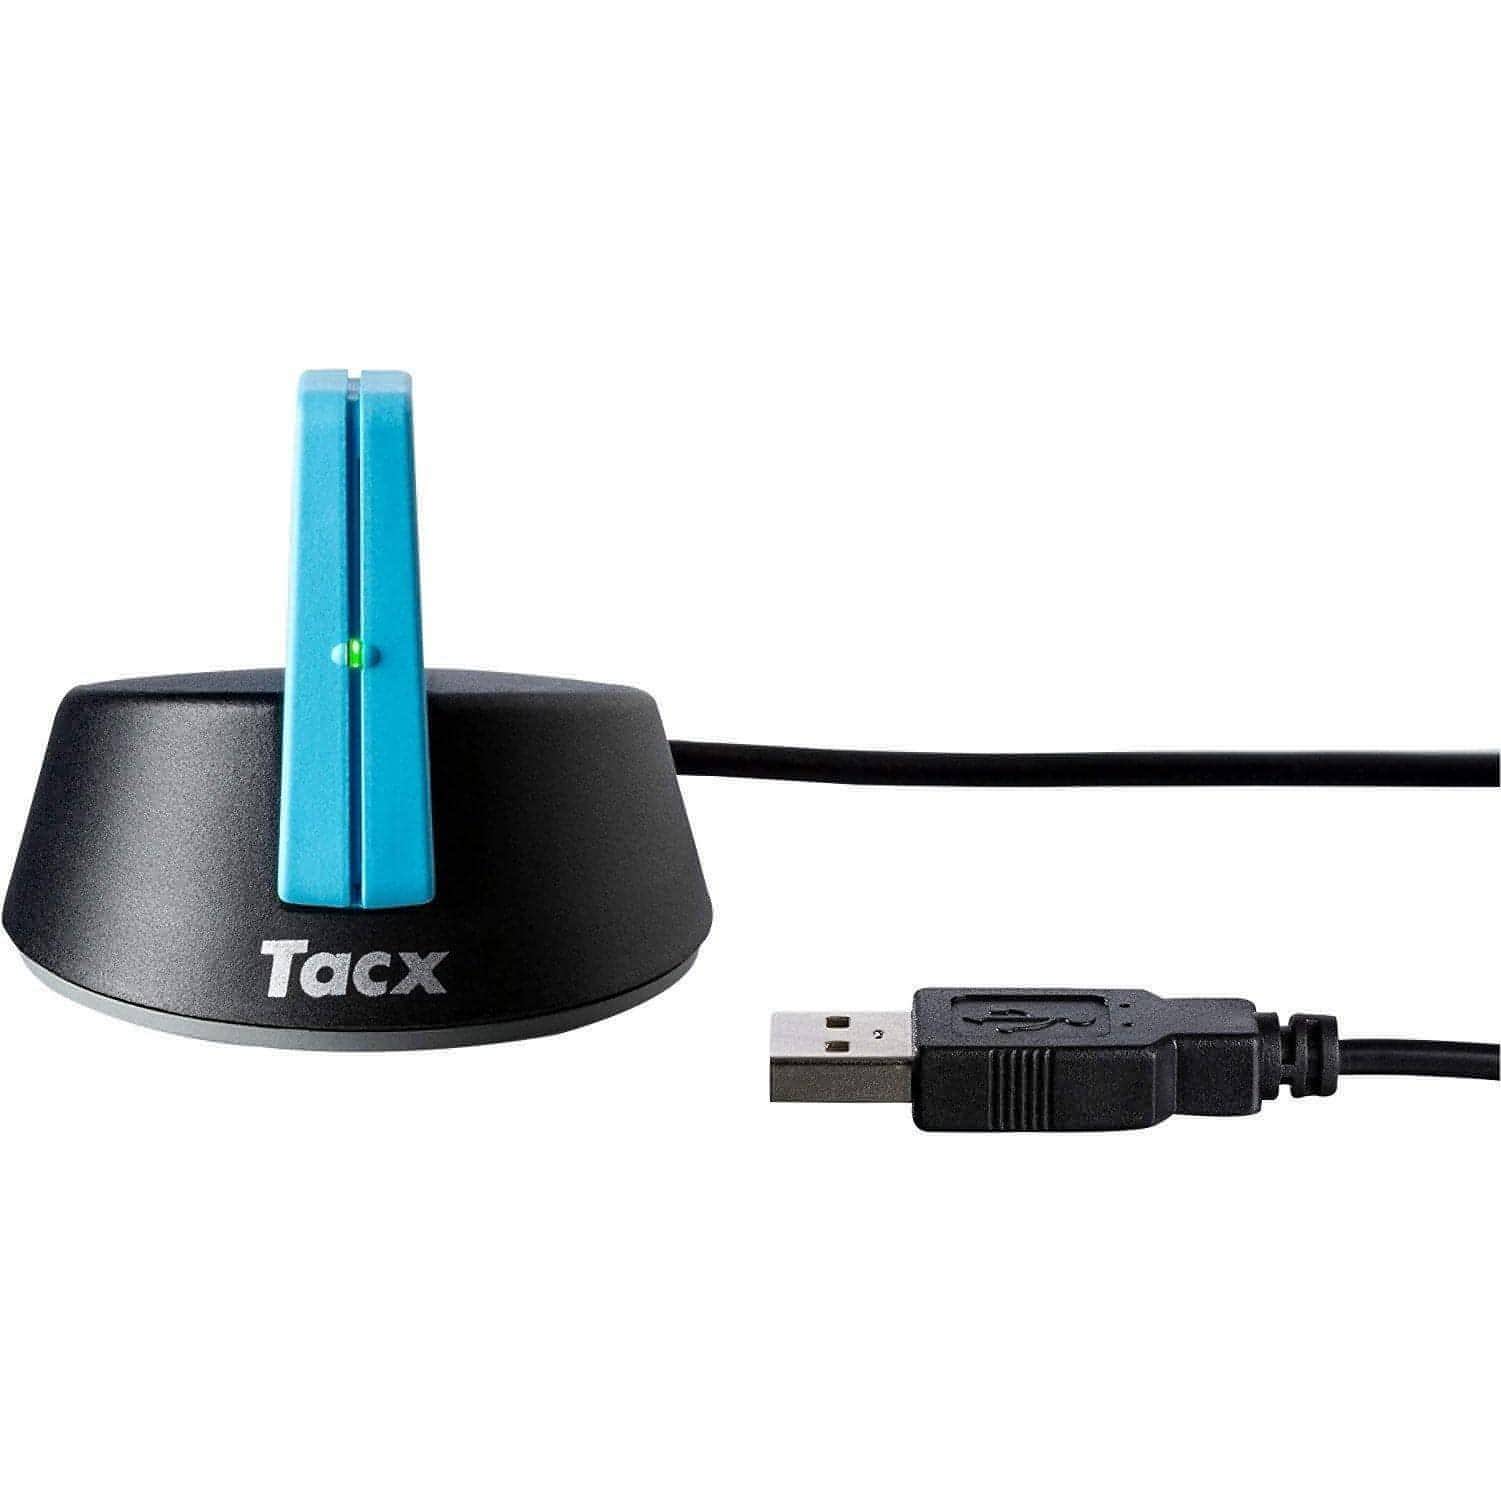 Tacx Antenna with ANT+ Connectivity 8714895043111 - Start Fitness